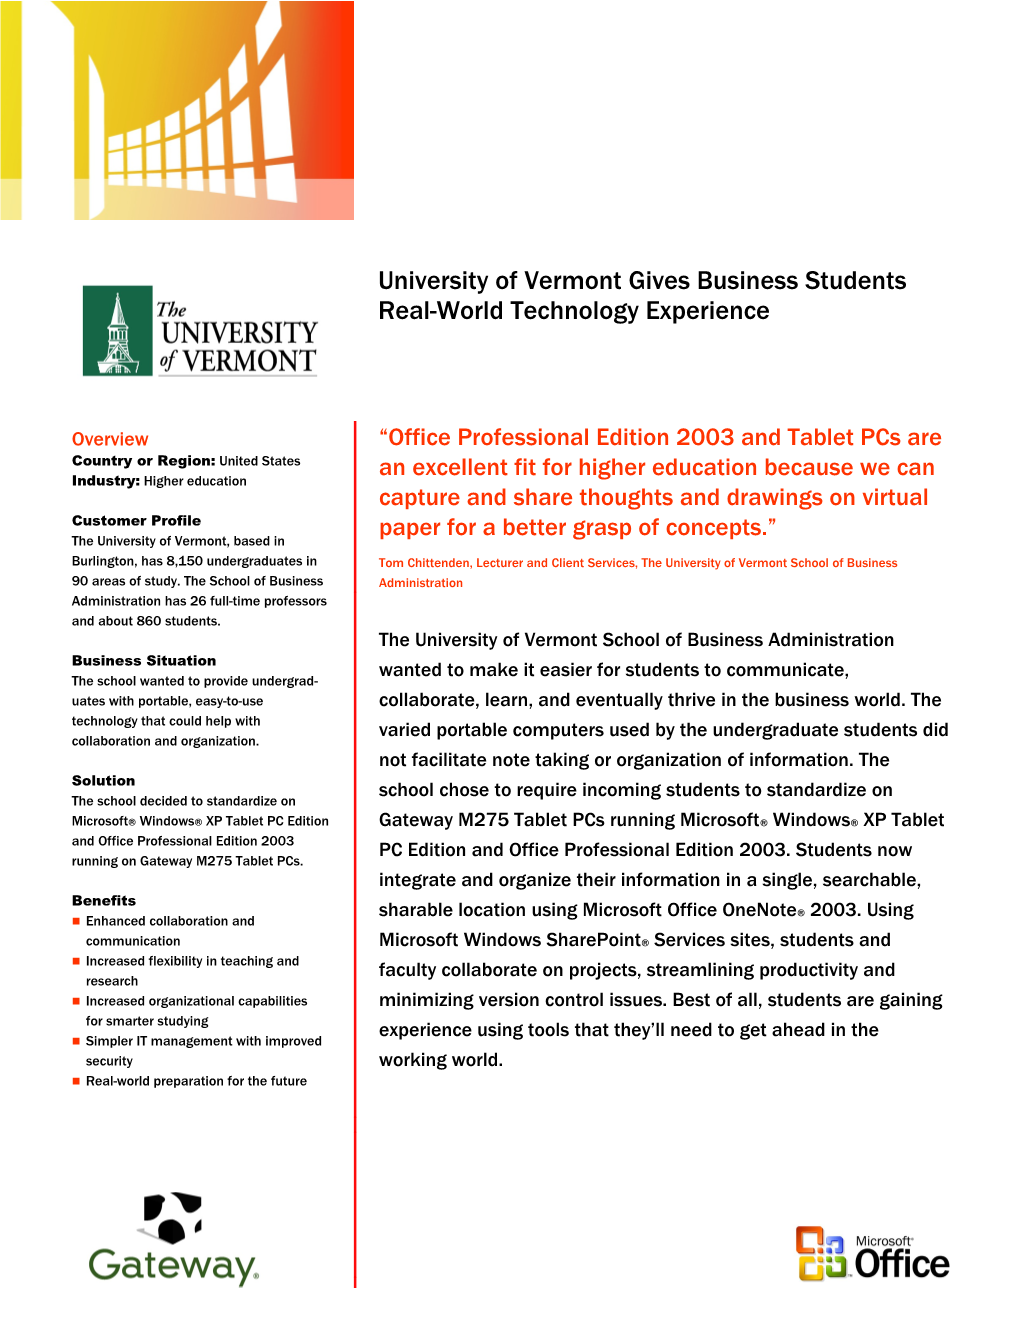 University of Vermont Gives Business Students Real-World Technology Experience